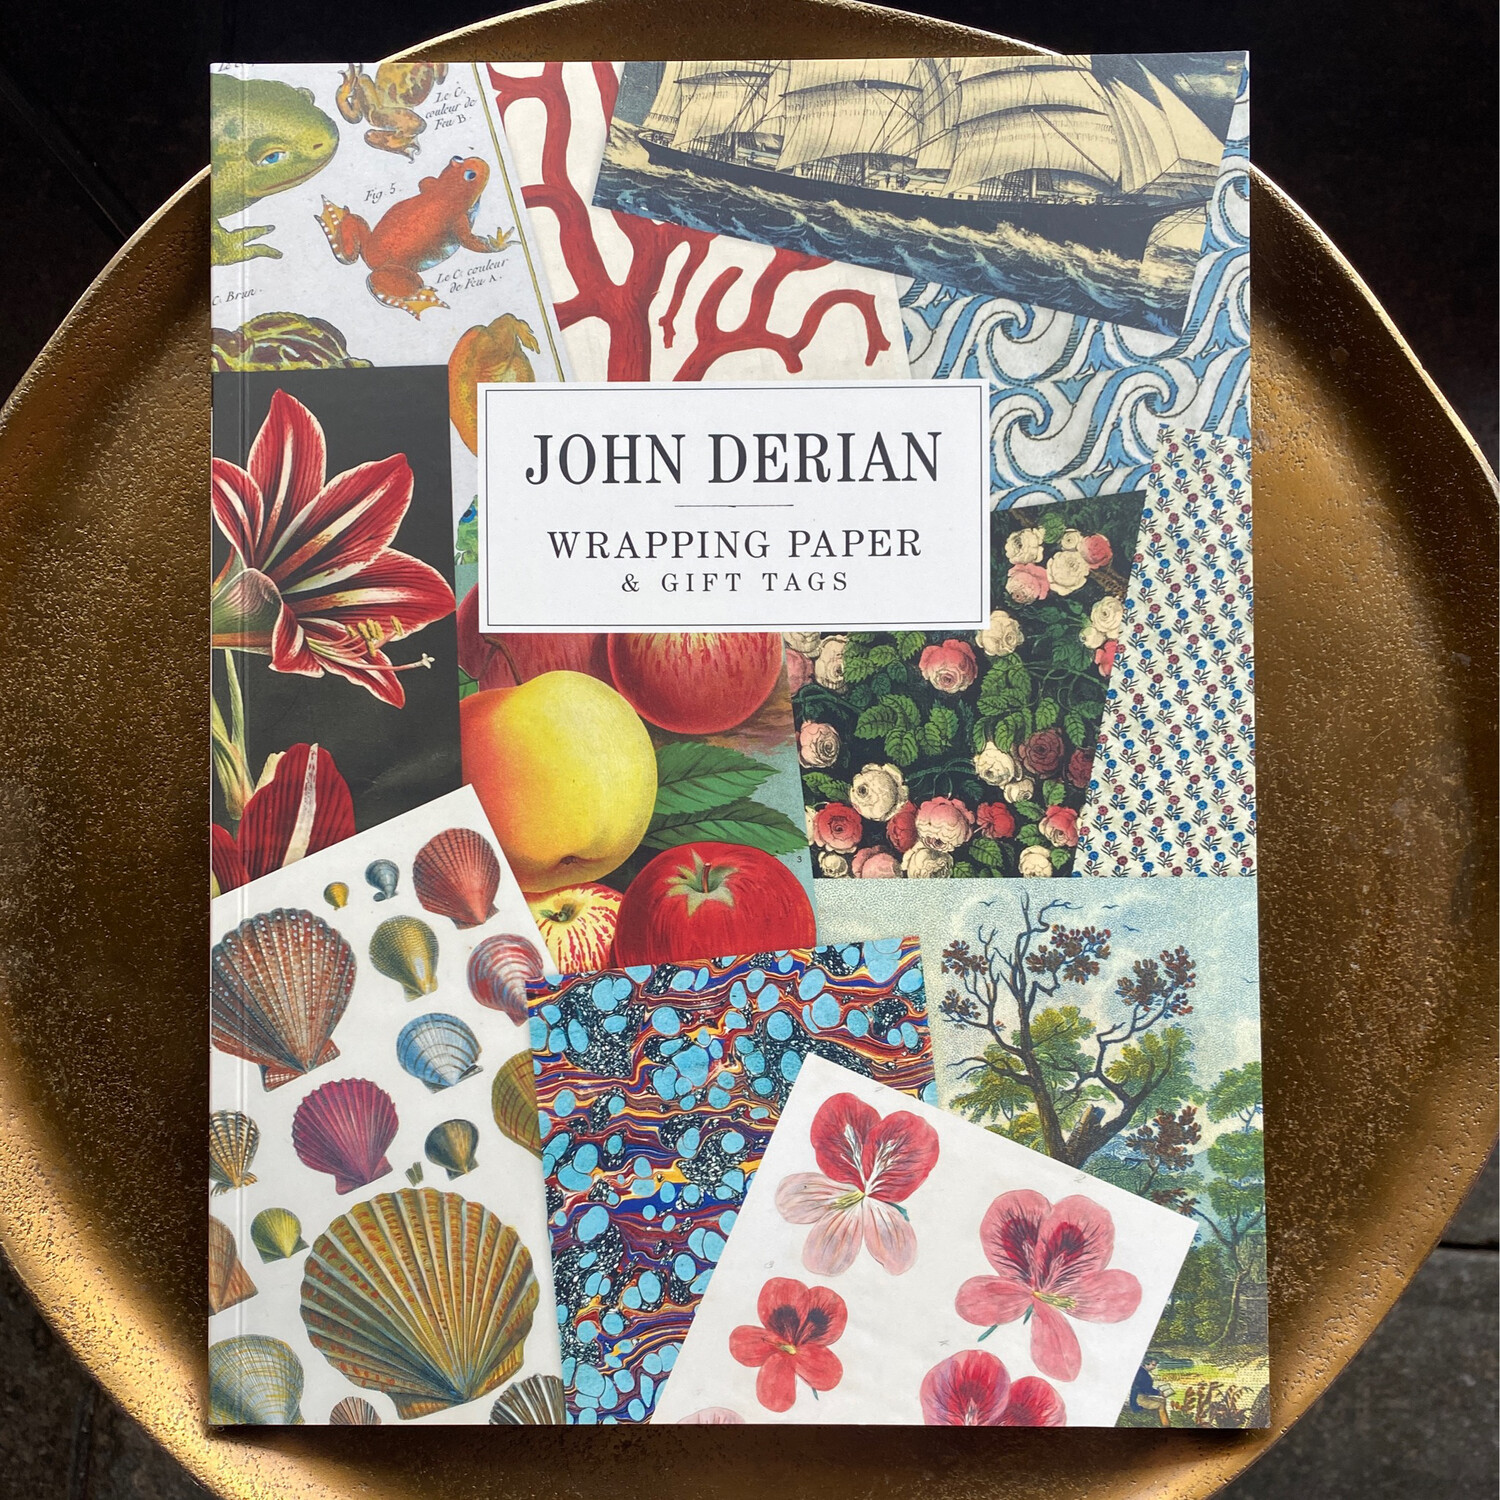 John Derian: Wrapping Paper & Gift Tags